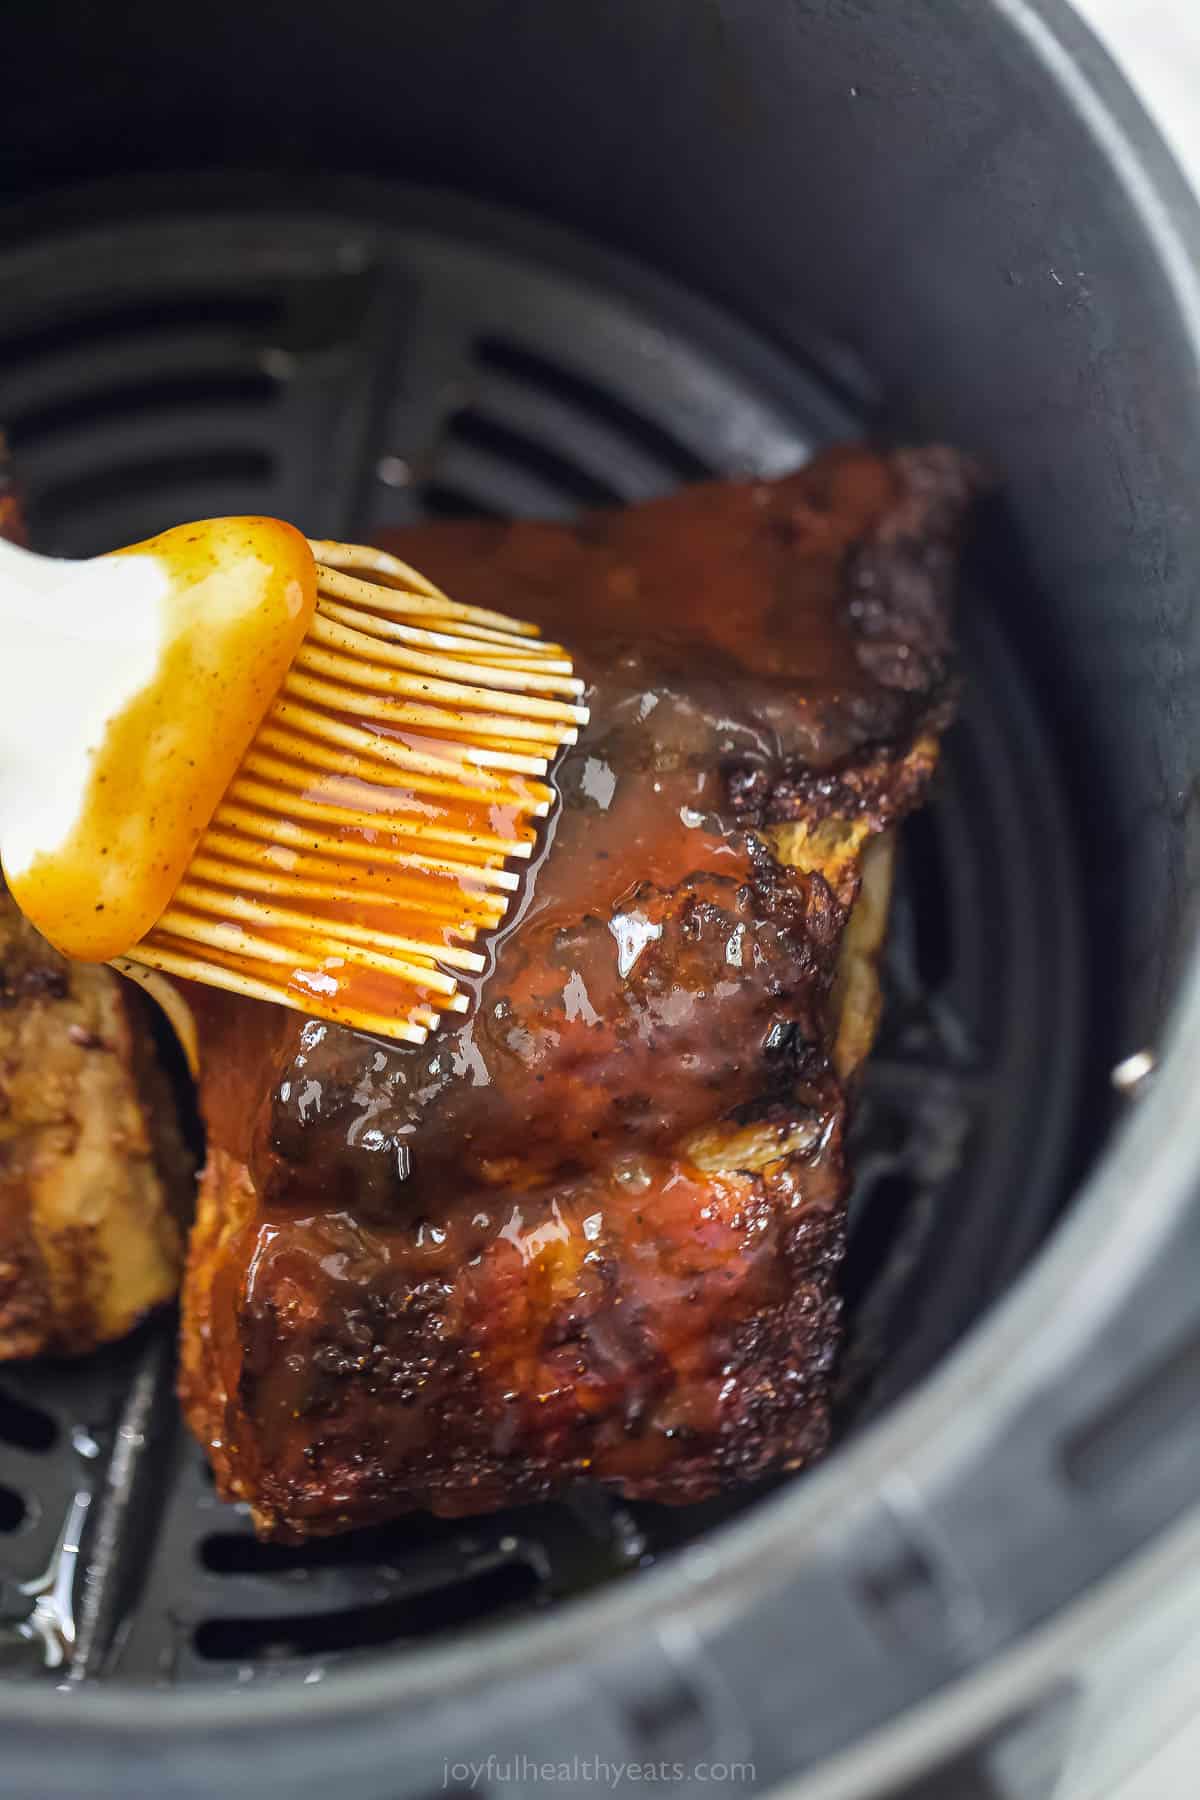 brushing sauce on ribs in an air fryer